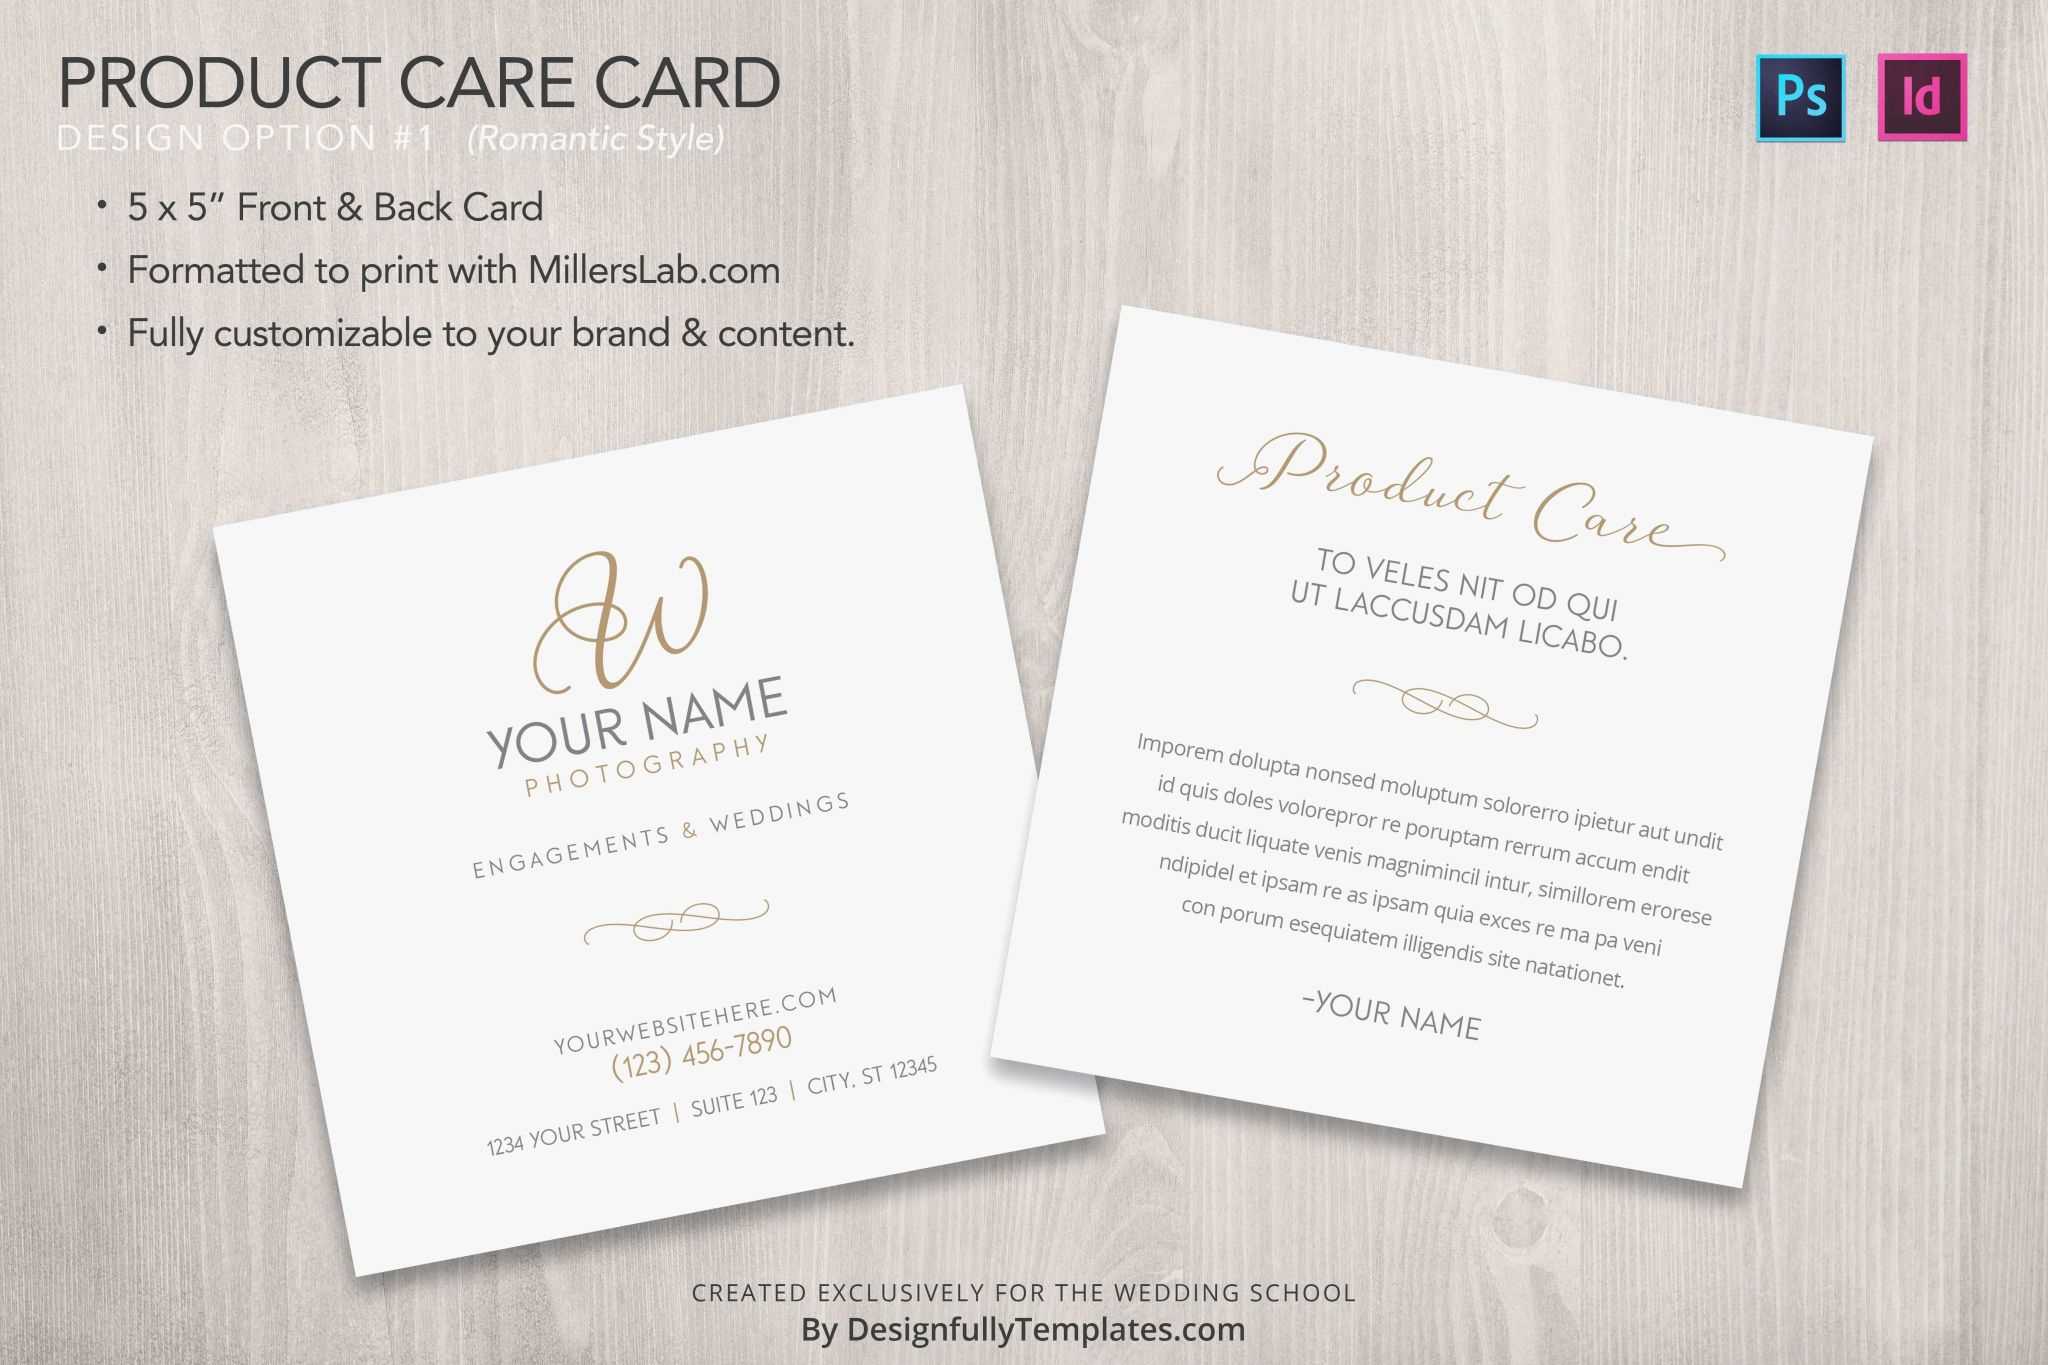 Free Place Card Templates 6 Per Page – Atlantaauctionco Intended For Free Place Card Templates 6 Per Page